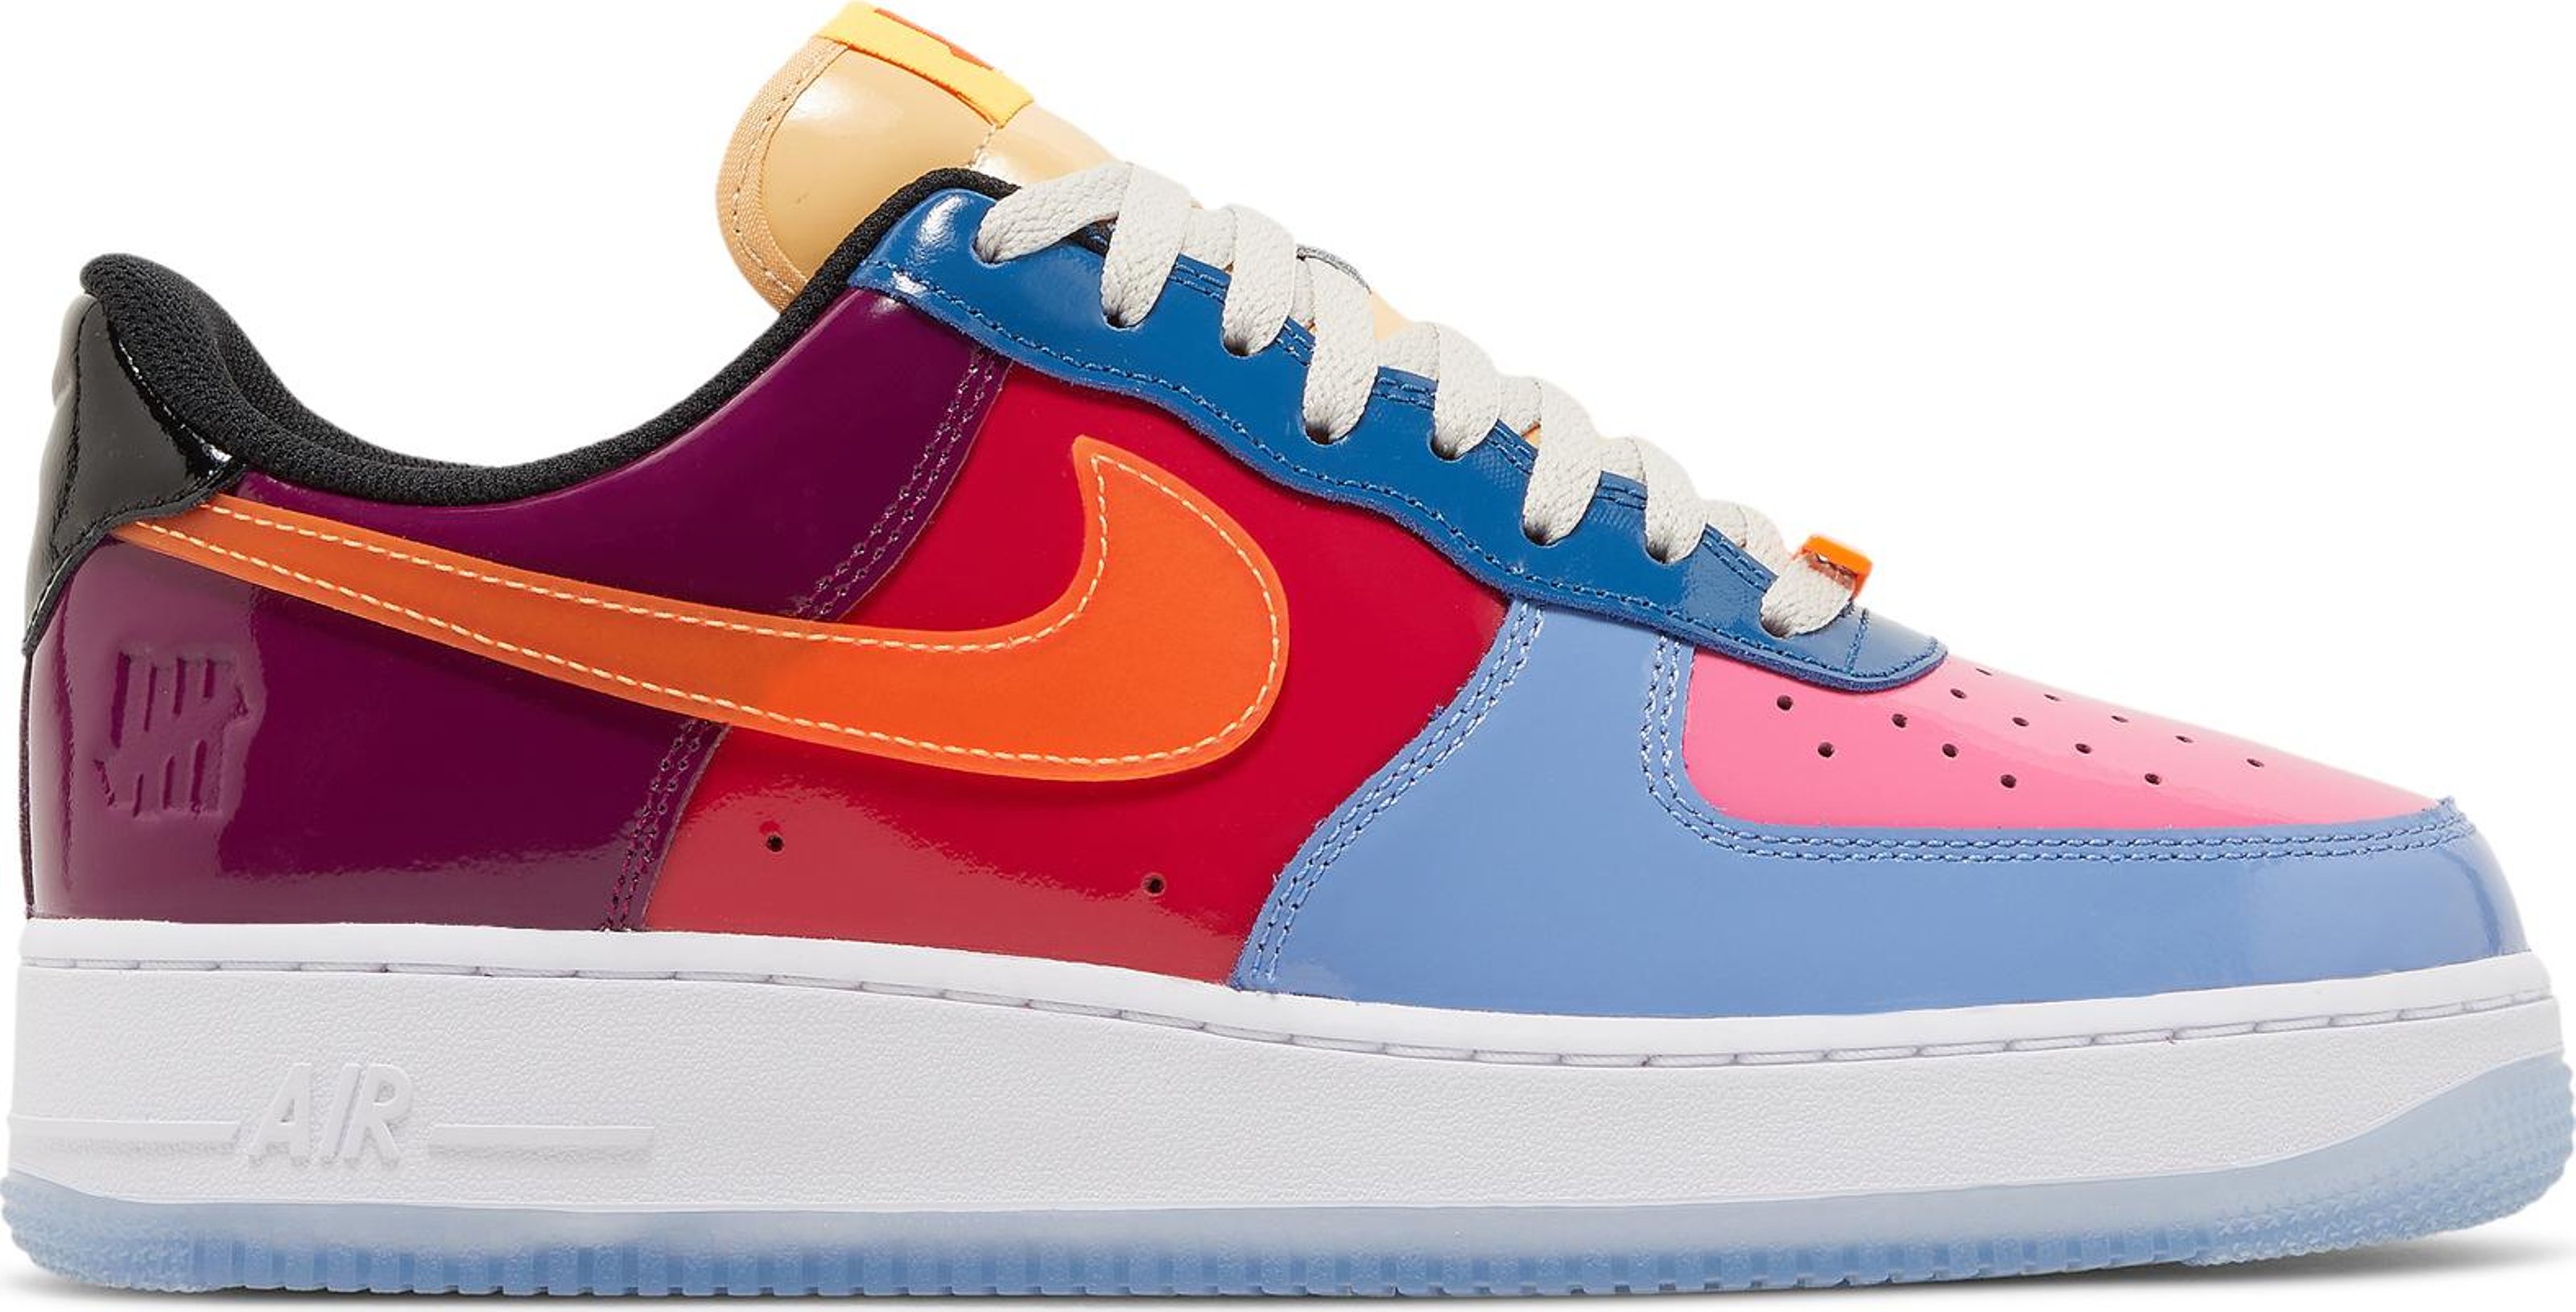 Buy Undefeated x Air Force 1 Low 'Total Orange' - DV5255 400 | GOAT